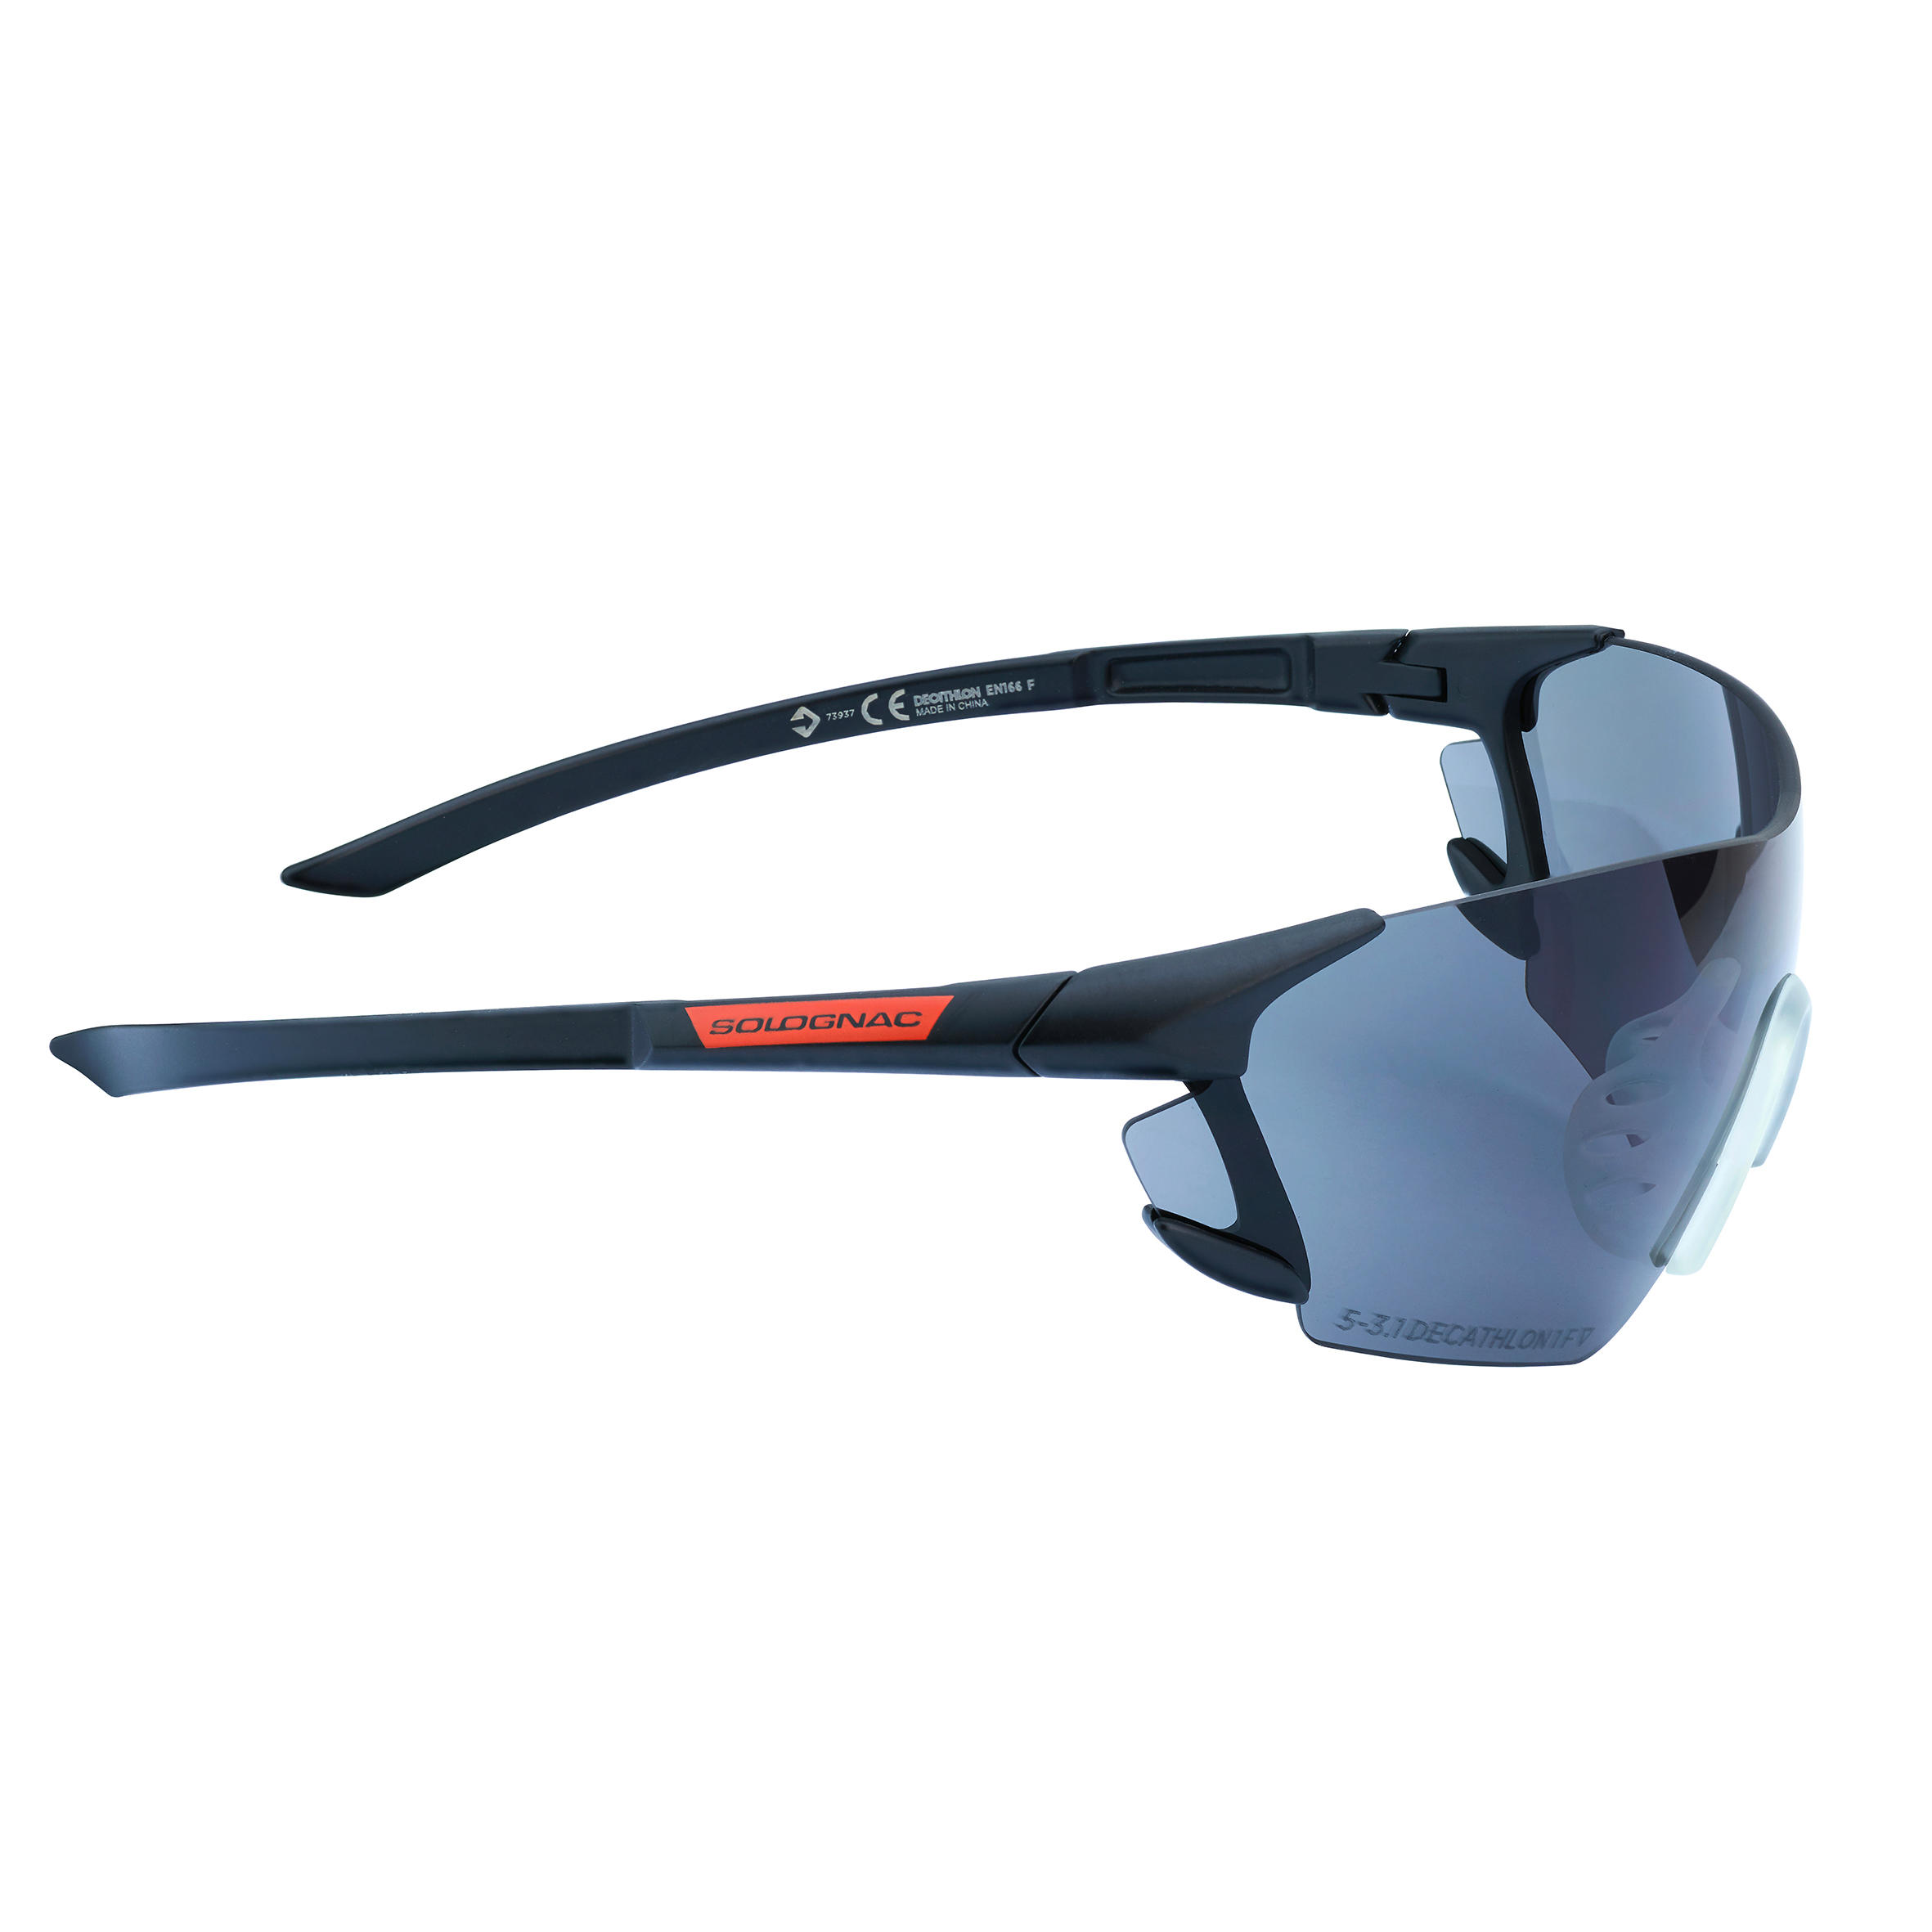 CLAY PIGEON SHOOTING PROTECTIVE GLASSES 100, STRONG SUNGLASS LENSES, CATEGORY 3 3/5